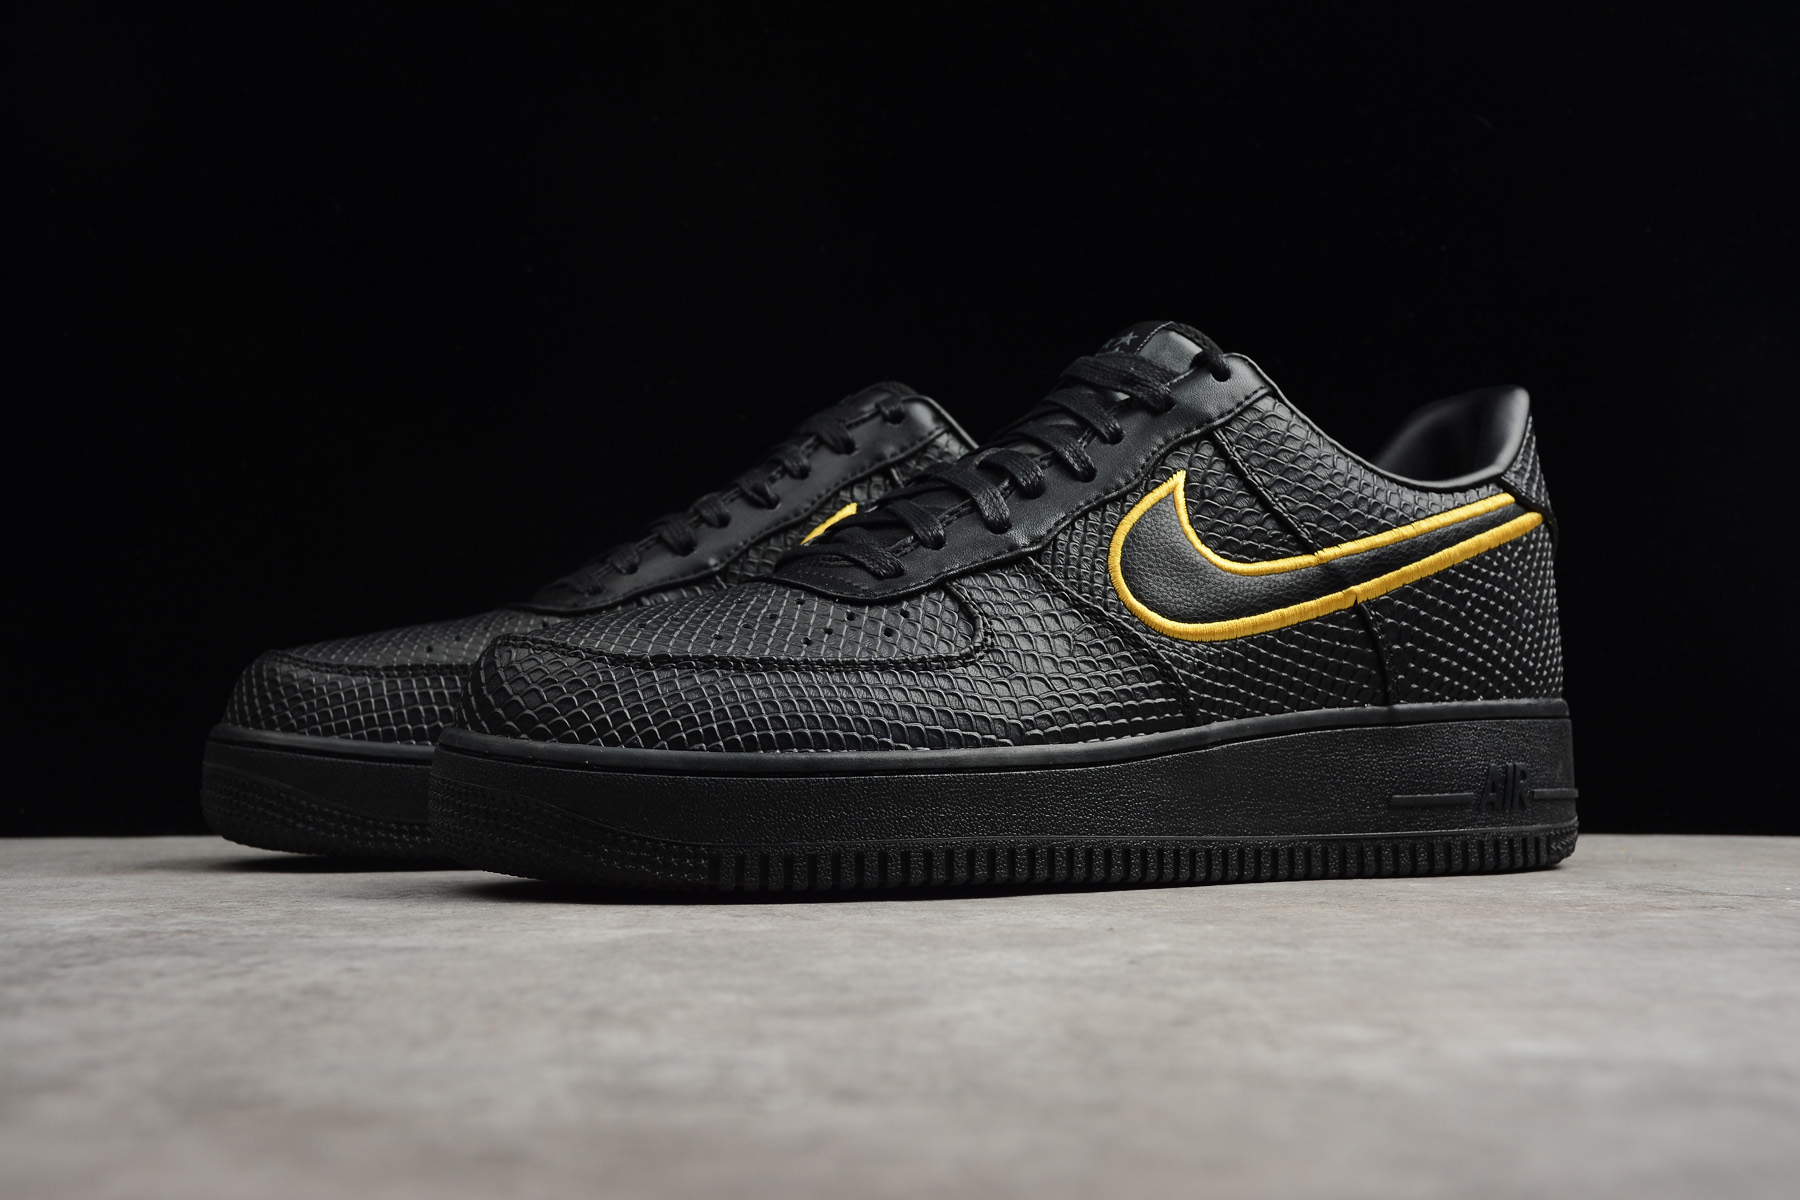 black and yellow af1 low